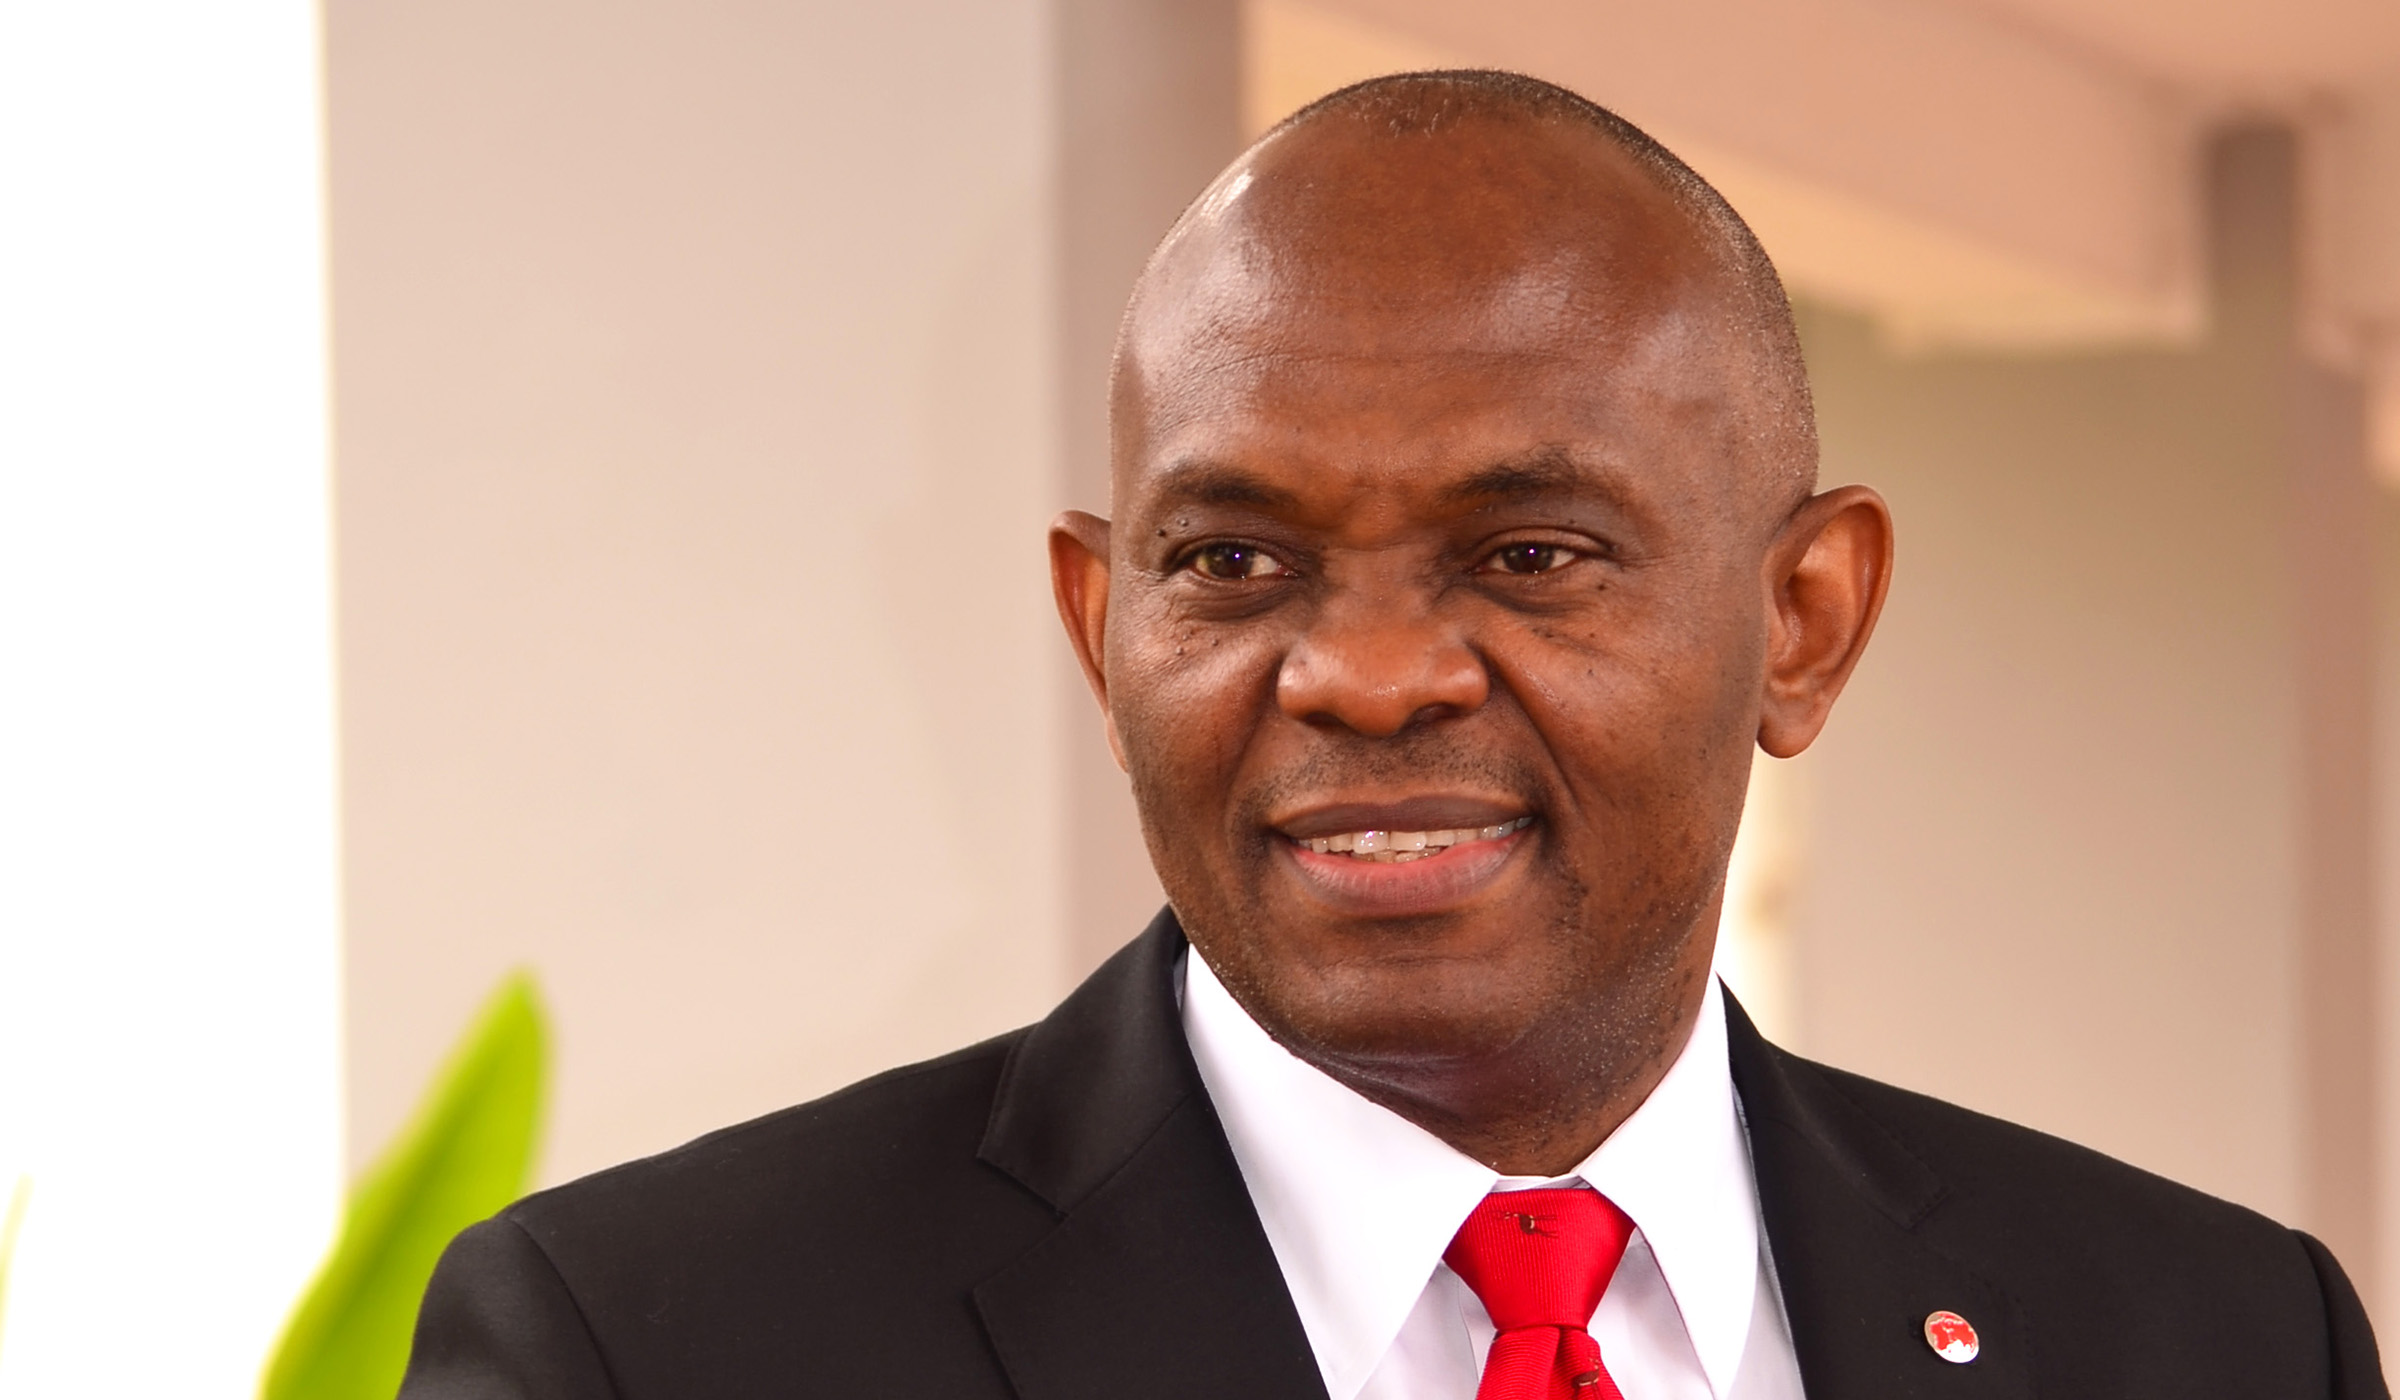 The initiative is funded by Nigerian business magnet, Tony Elumelu. File.